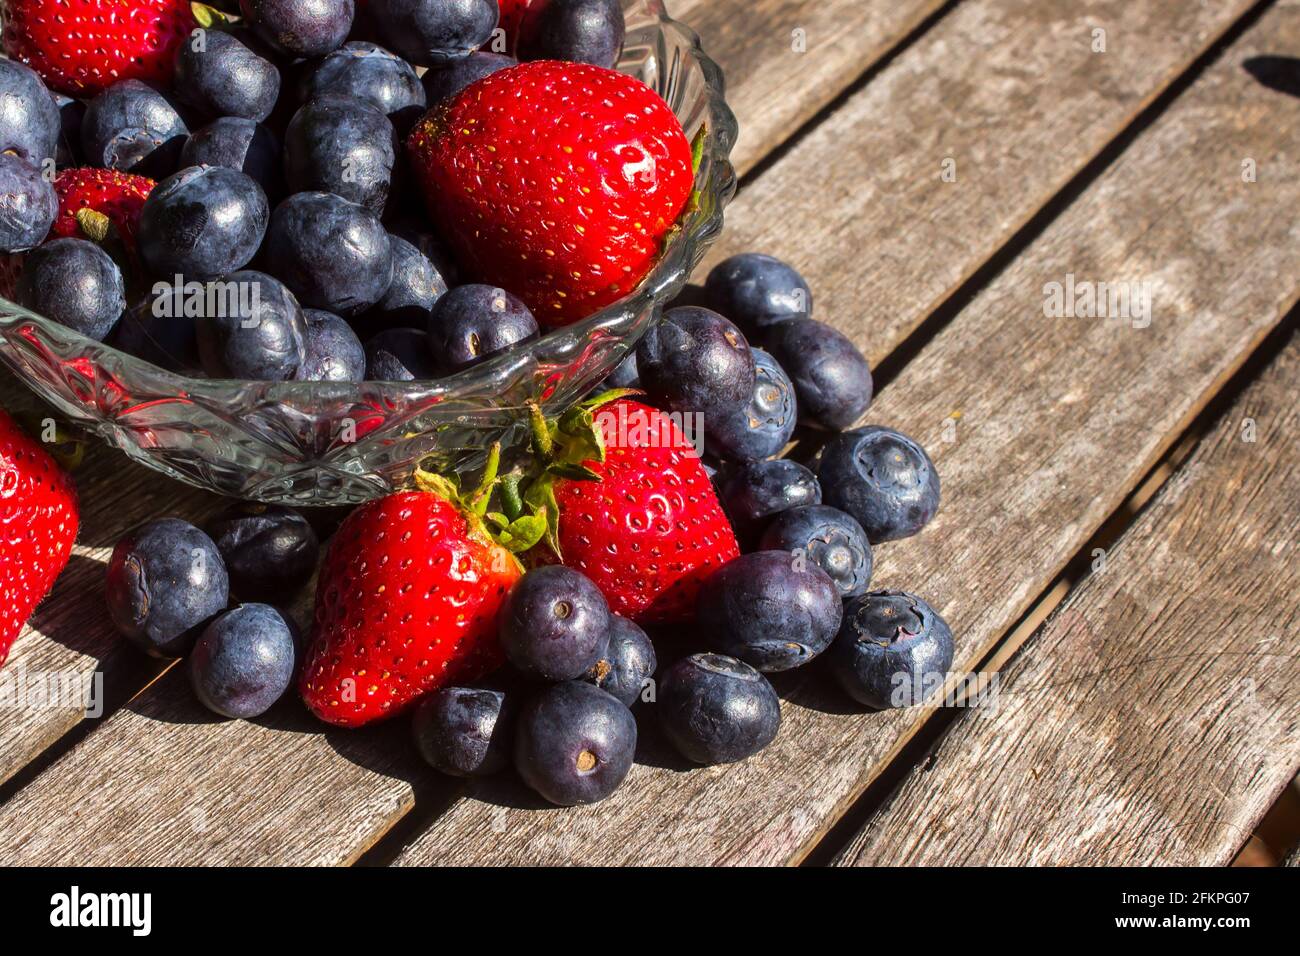 A glass bowl, filled to overflowing with bright red strawberries and indigo-colored blueberries on a weathered wooden surface Stock Photo